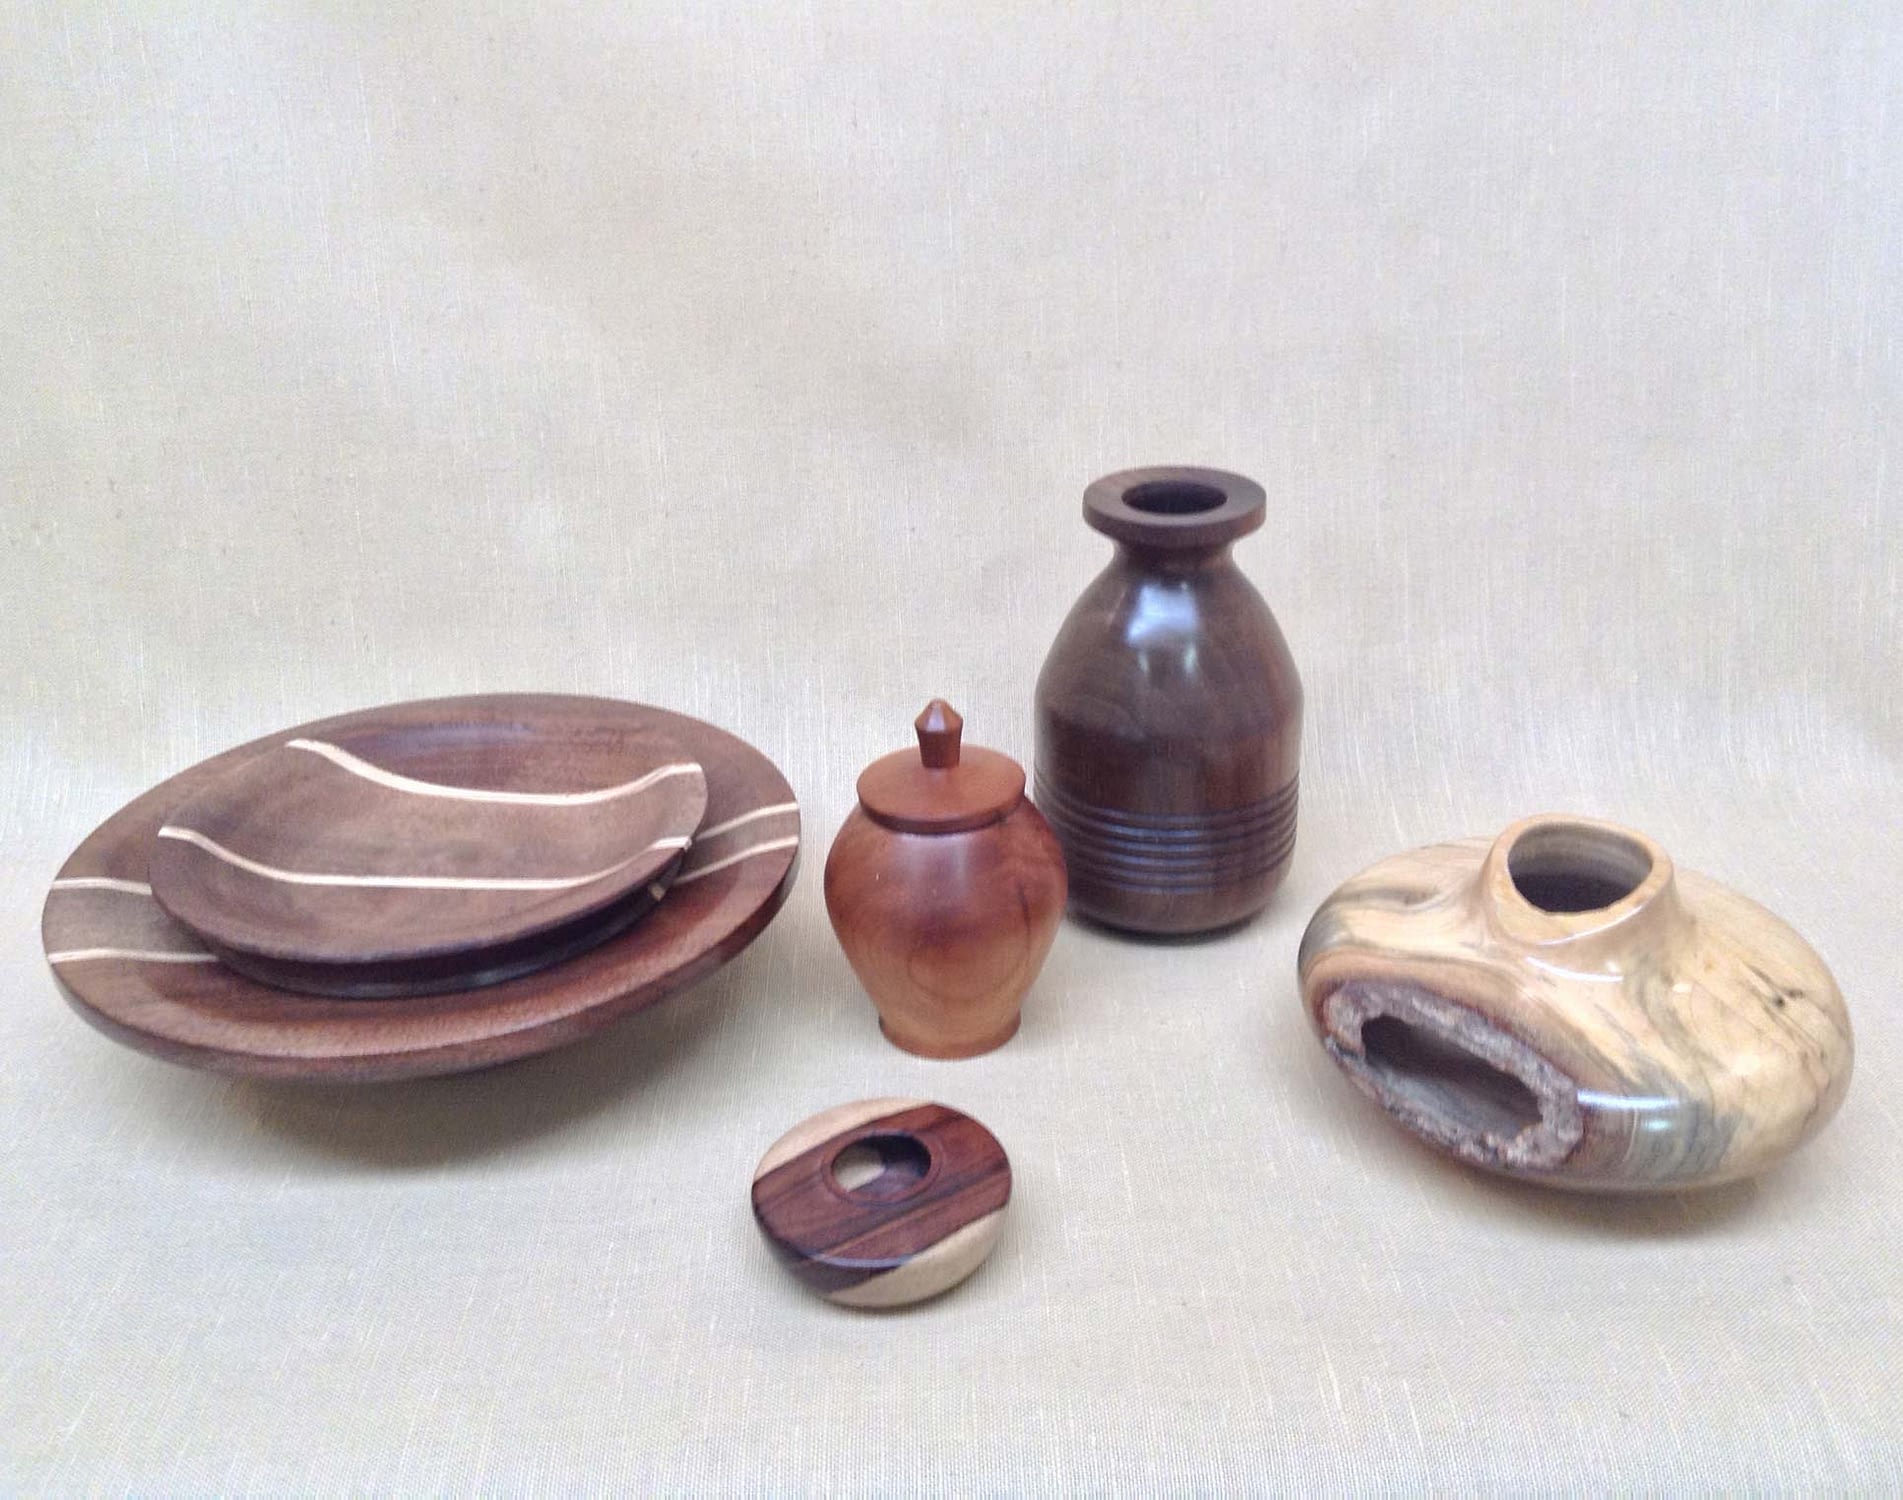 Handcrafted ceramic art and wood turnings from the Frame Cellar gift shop